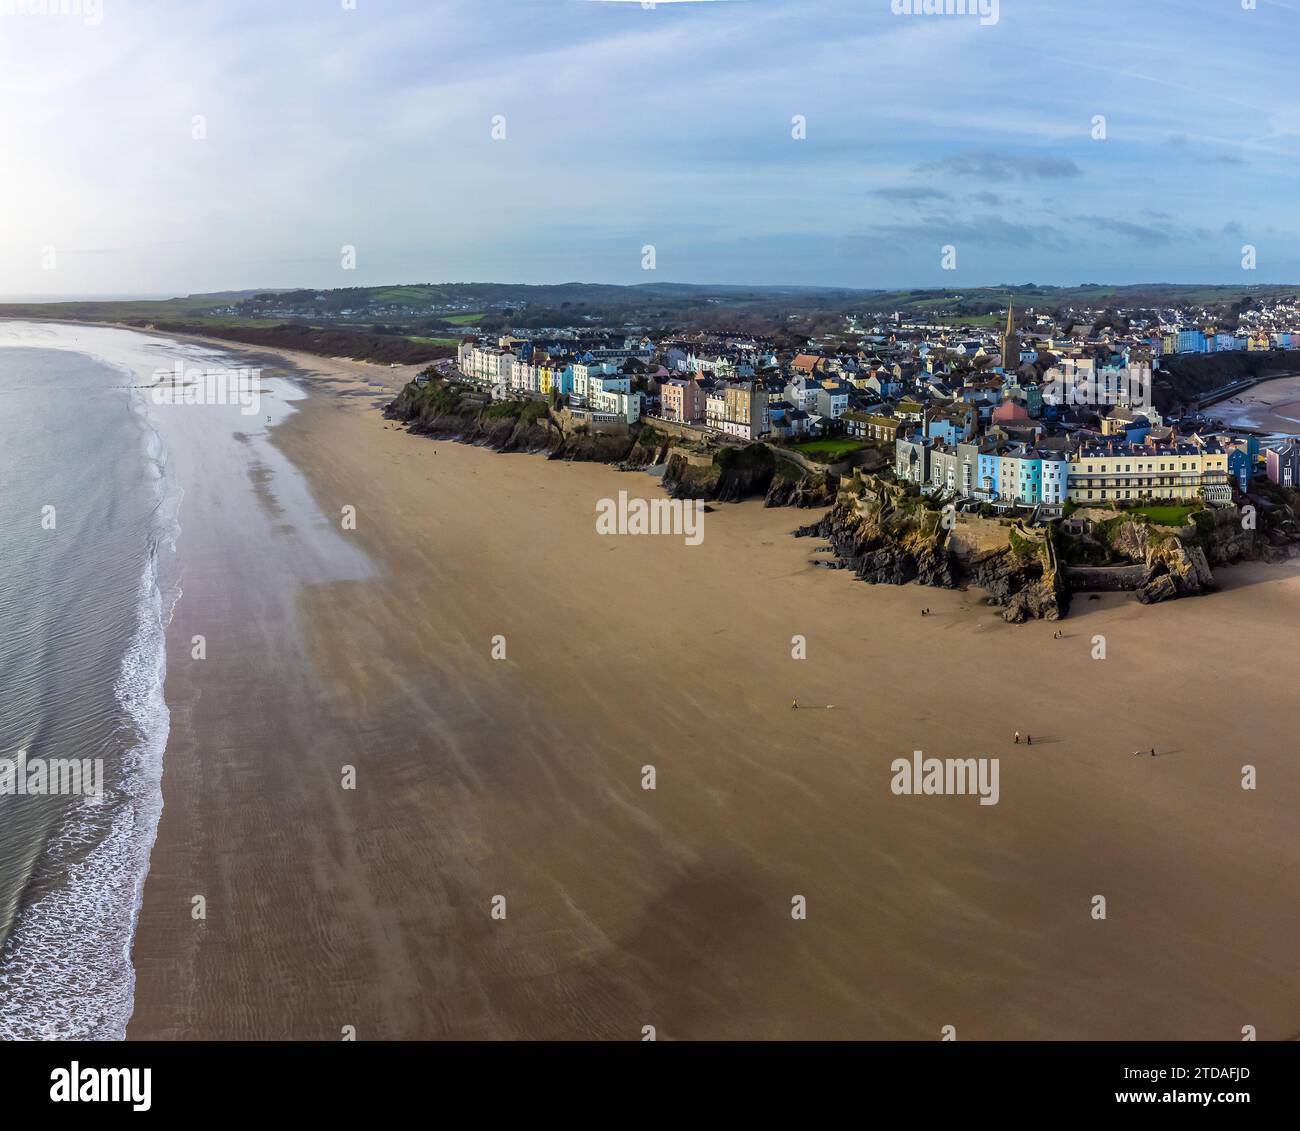 An aerial view along the South beach in Tenby, Wales on a sunny day Stock Photo